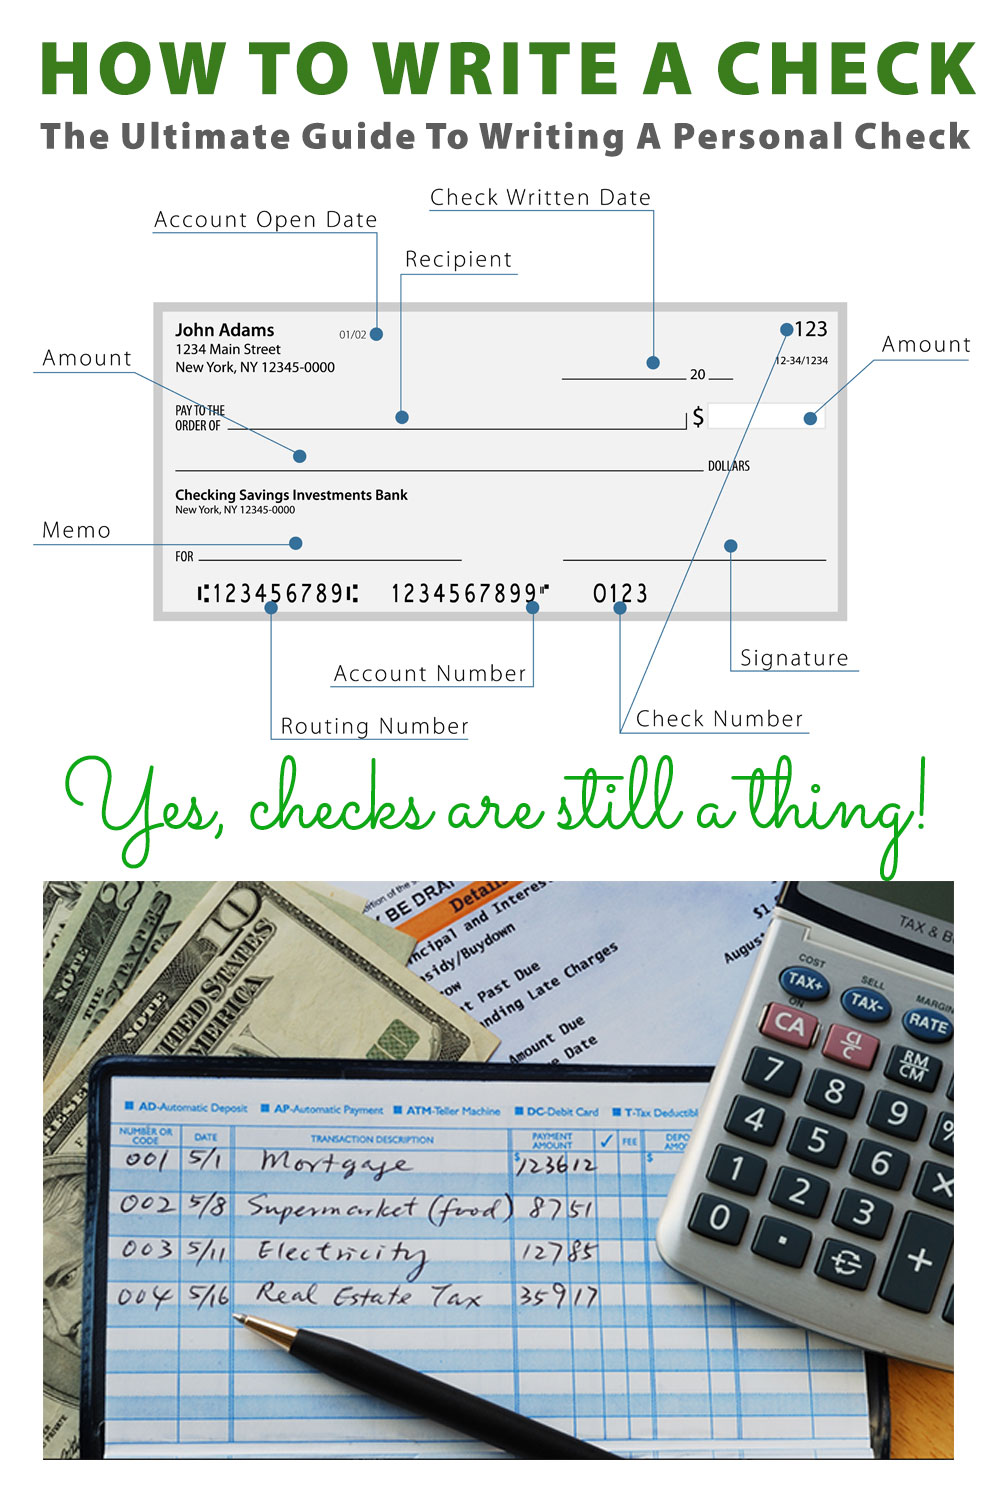 How To Write A Check: The Ultimate Guide To Writing A Check In 26